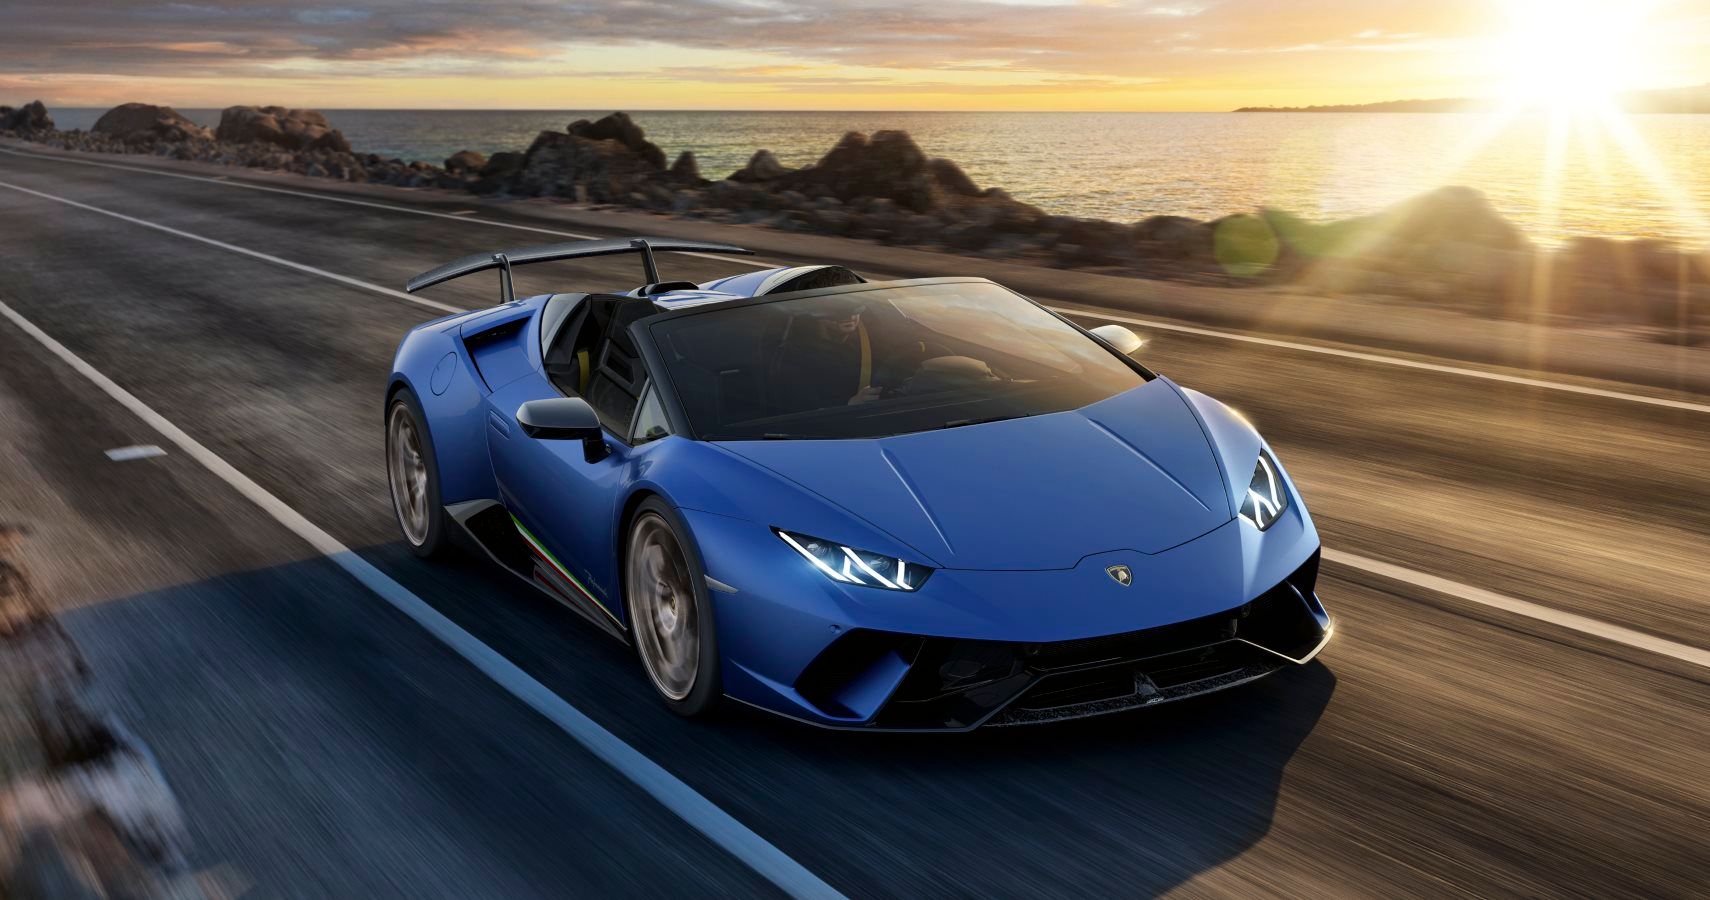 Lamborghini To Cap Vehicle Production To 8,000 Units By 2020